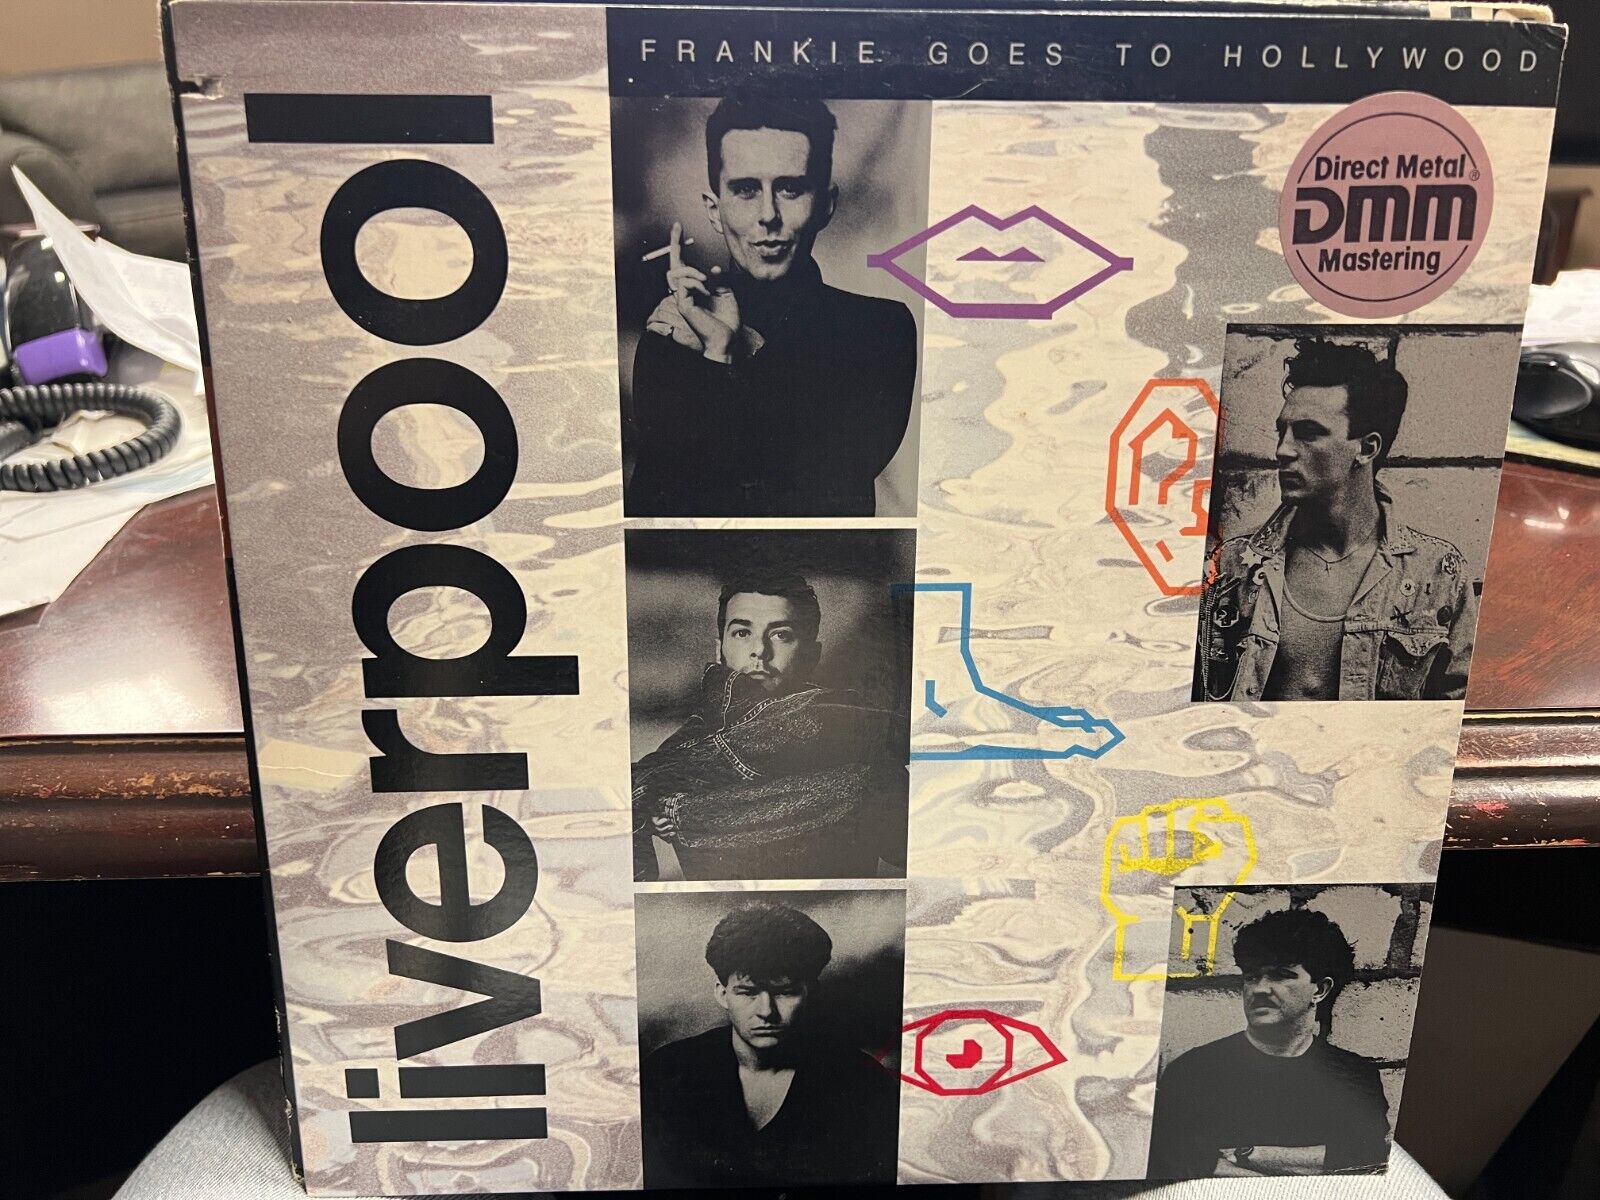 Frankie Goes to Hollywood Liverpool LP 1986 Island 90546 DJ PROMO DMM INNER